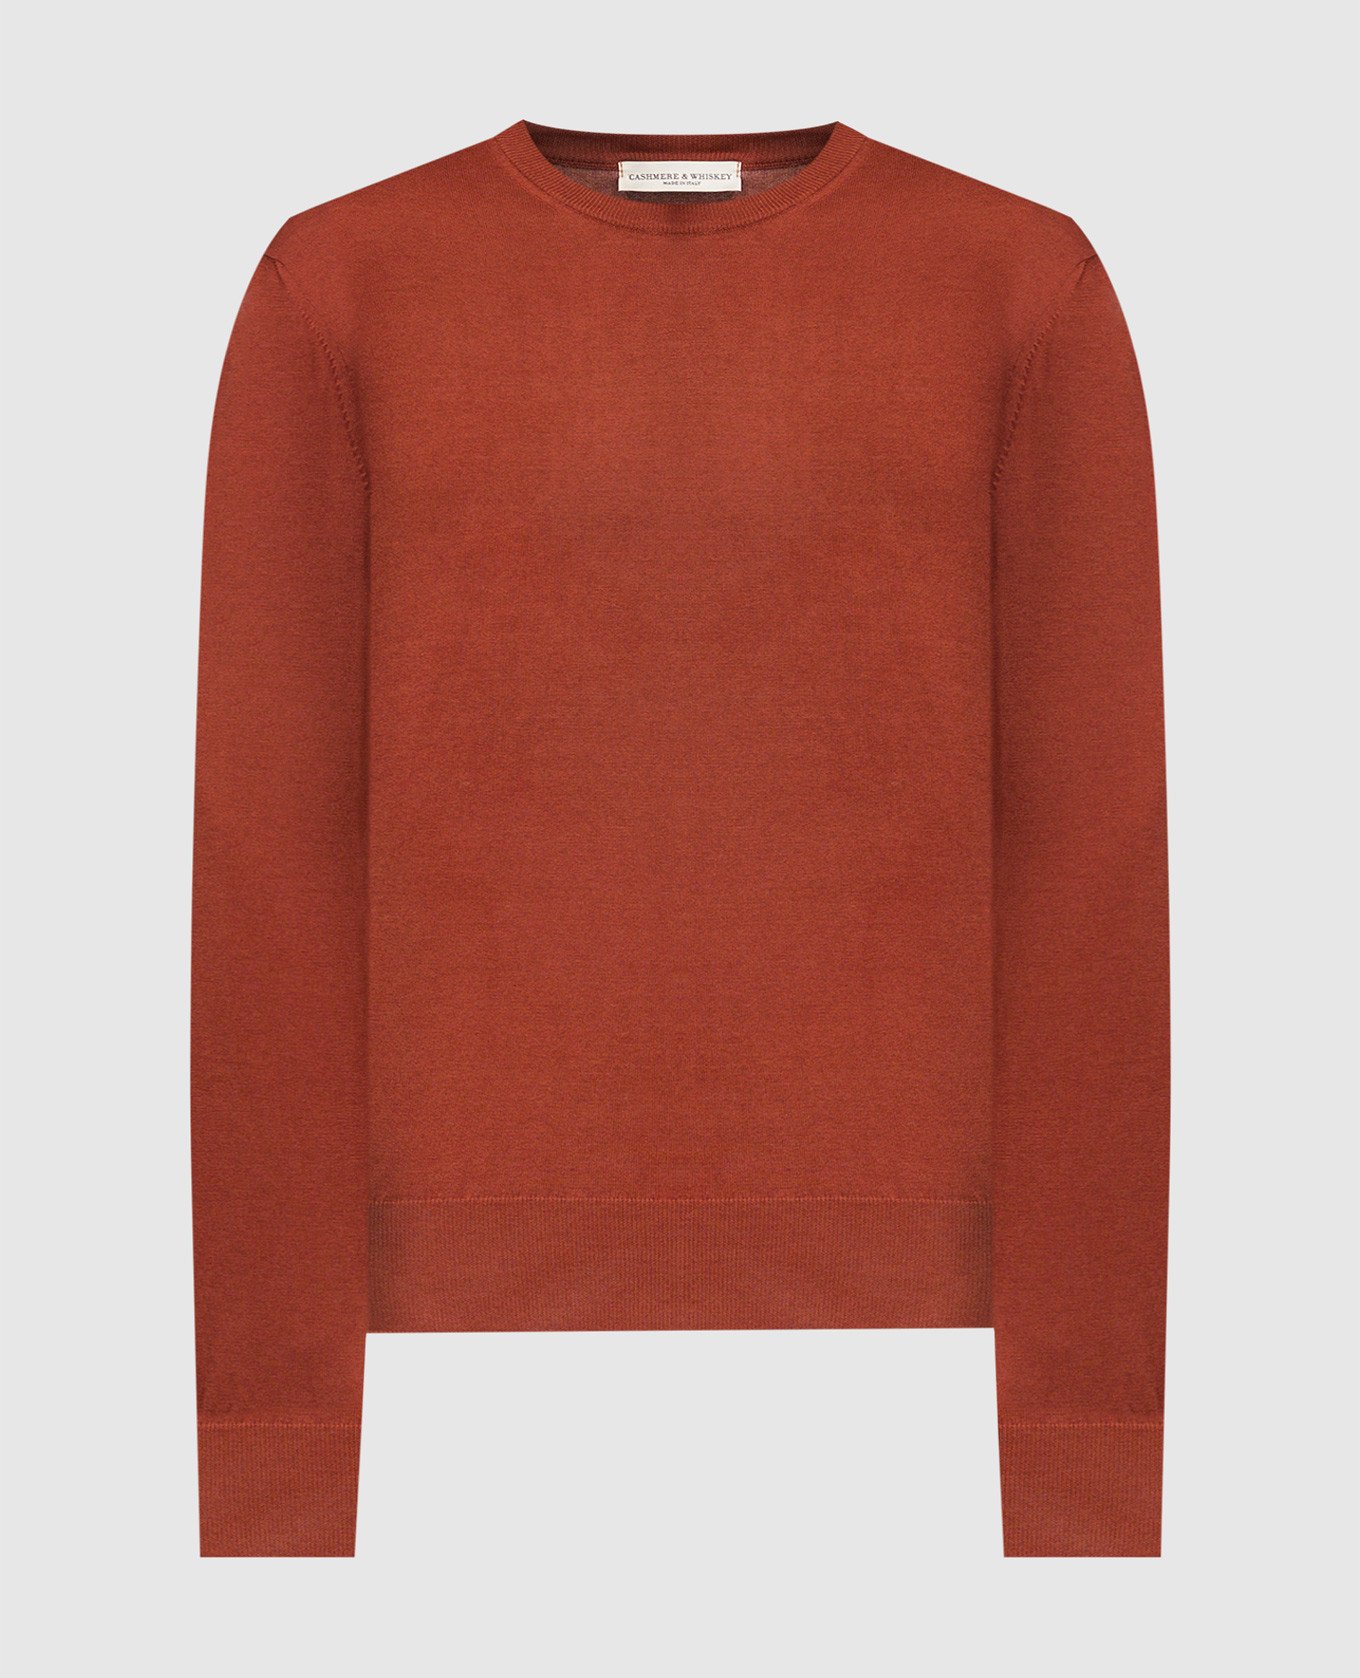 Brown jumper with silk and cashmere